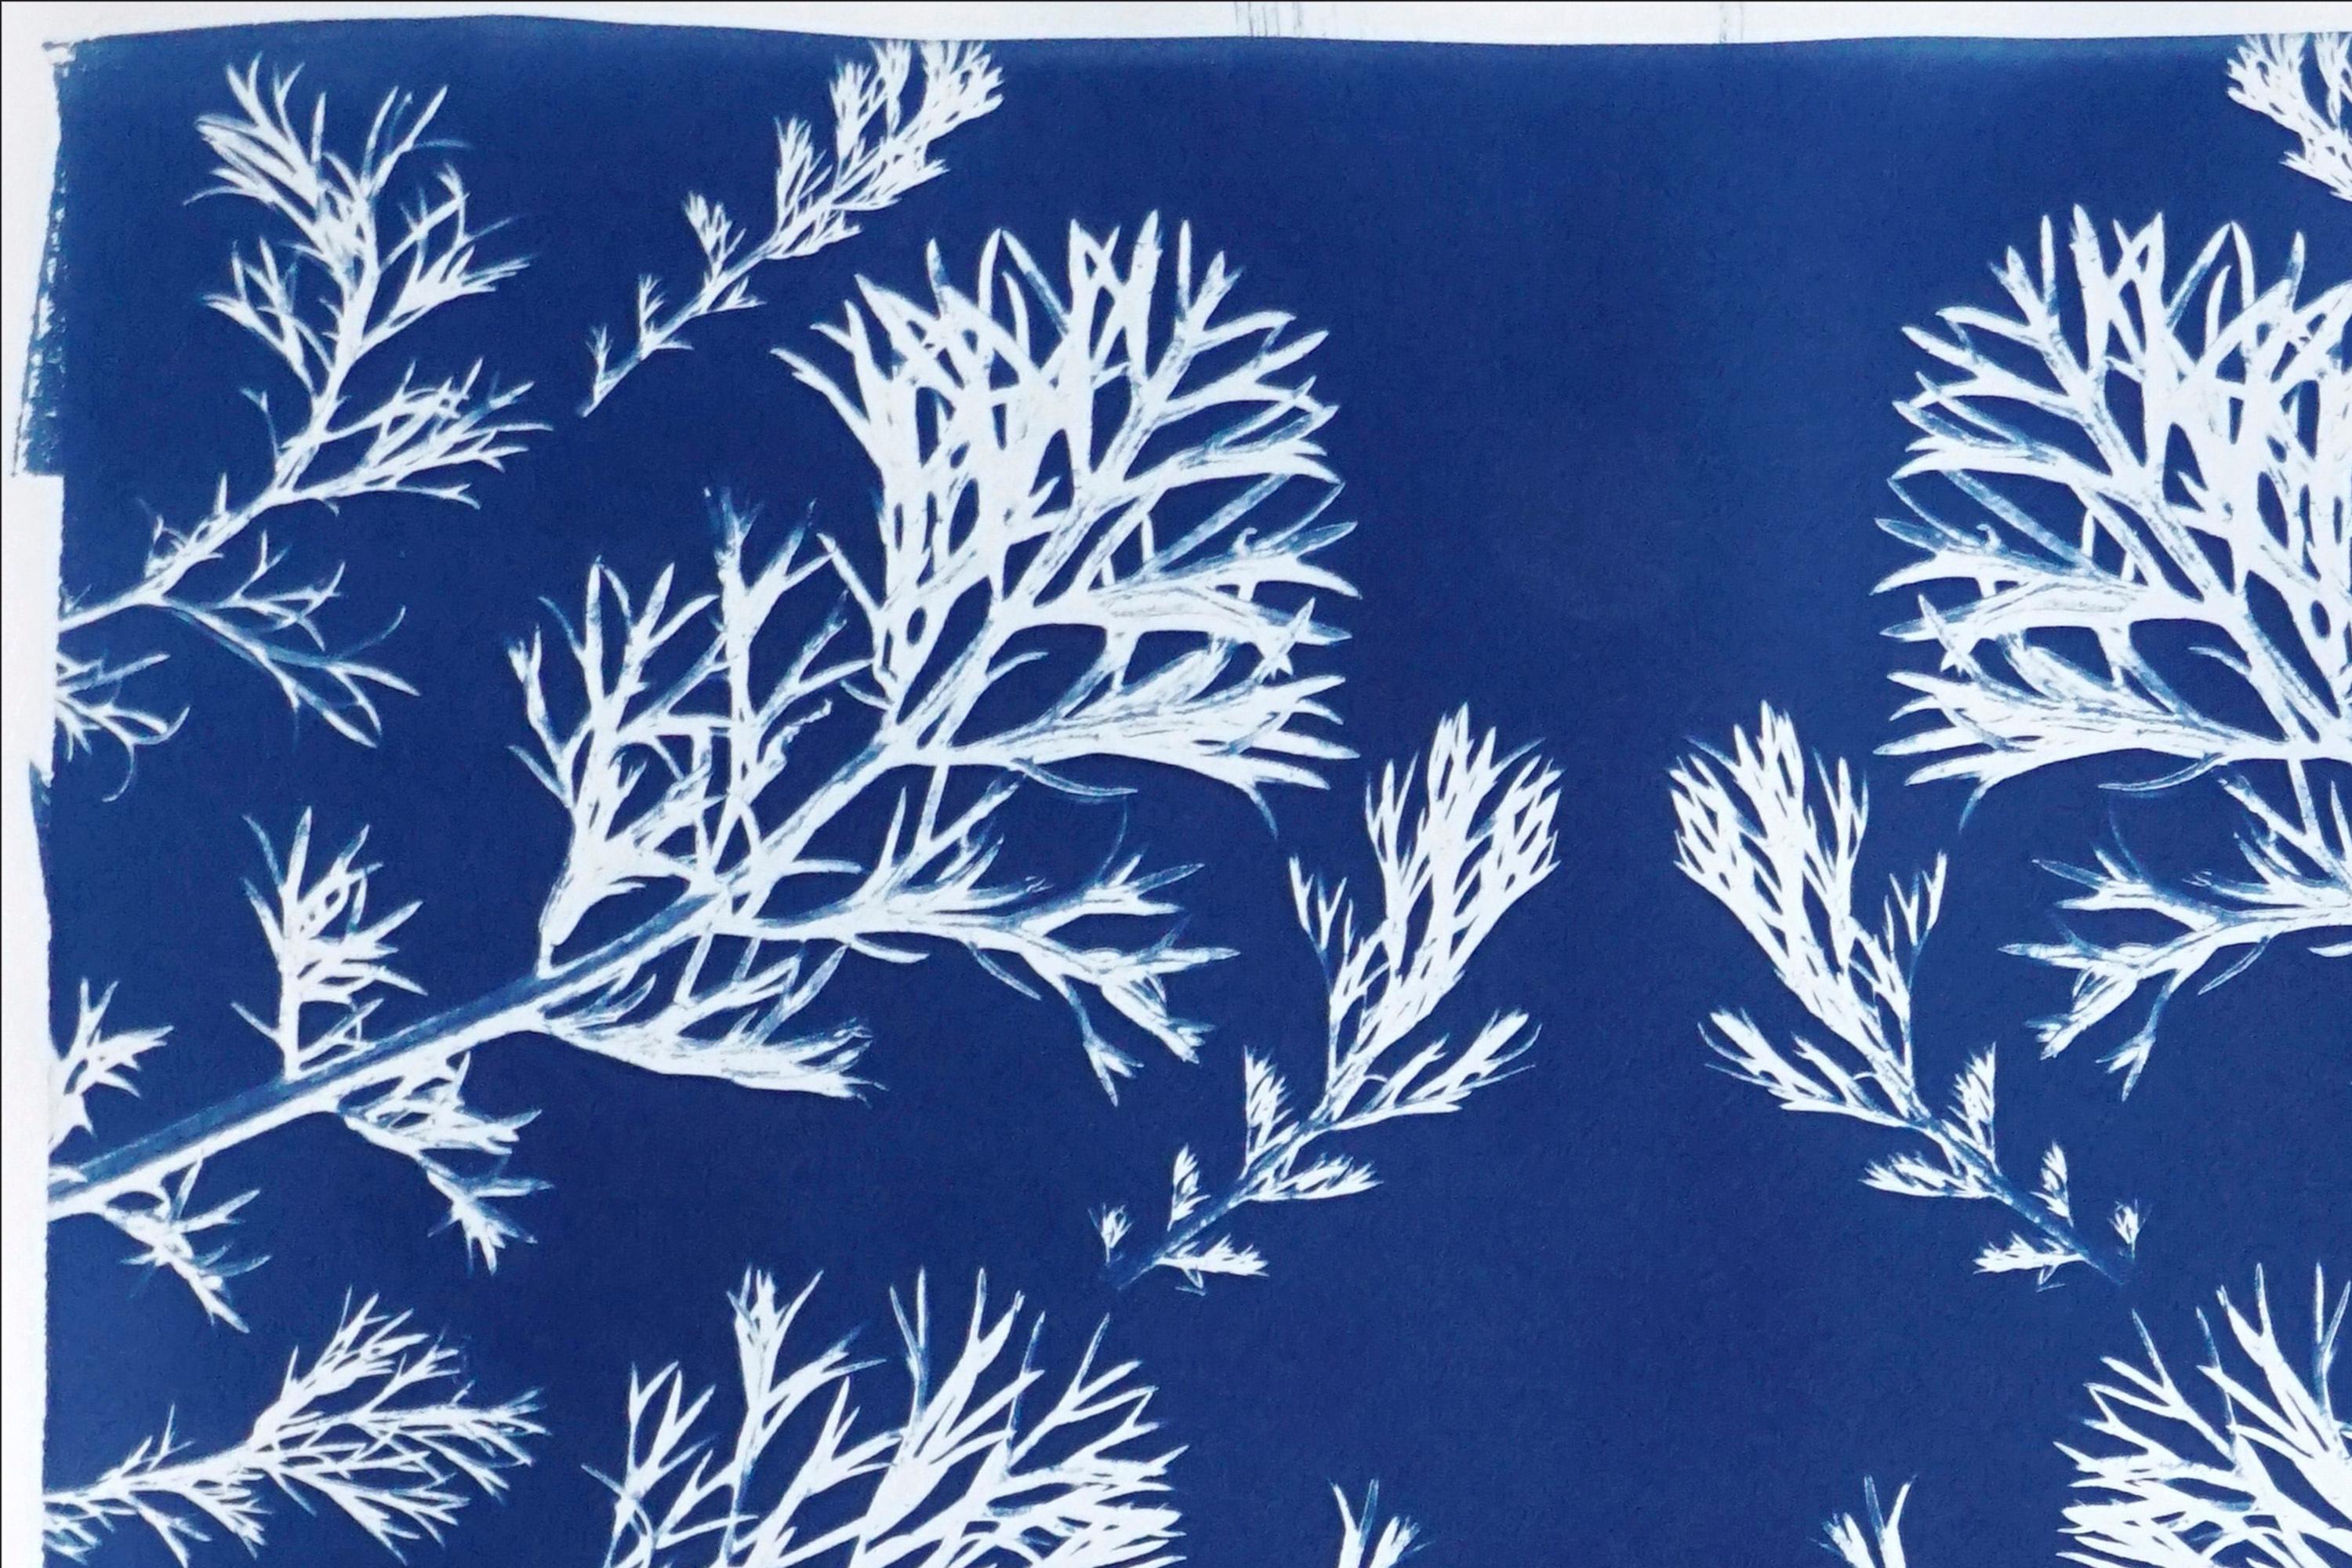 Classic Botanical Cyanotype, Handmade Using Natural Sunlight, Limited Edition  - American Modern Print by Kind of Cyan